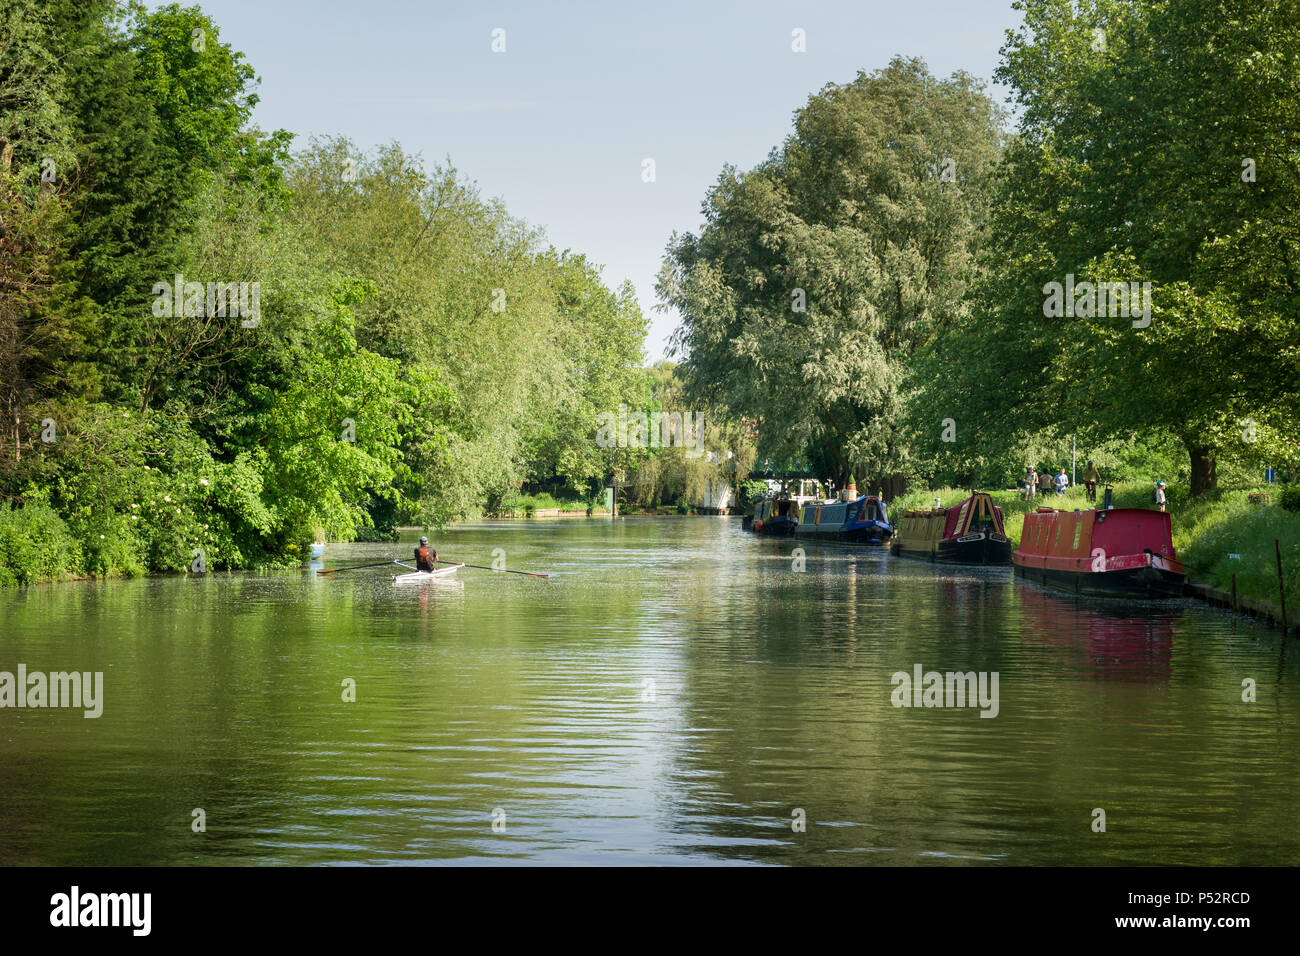 Narrow boats moored on the river Cam as people walk alongside it and a rower rows by on a sunny Summer afternoon, Cambridge, UK Stock Photo